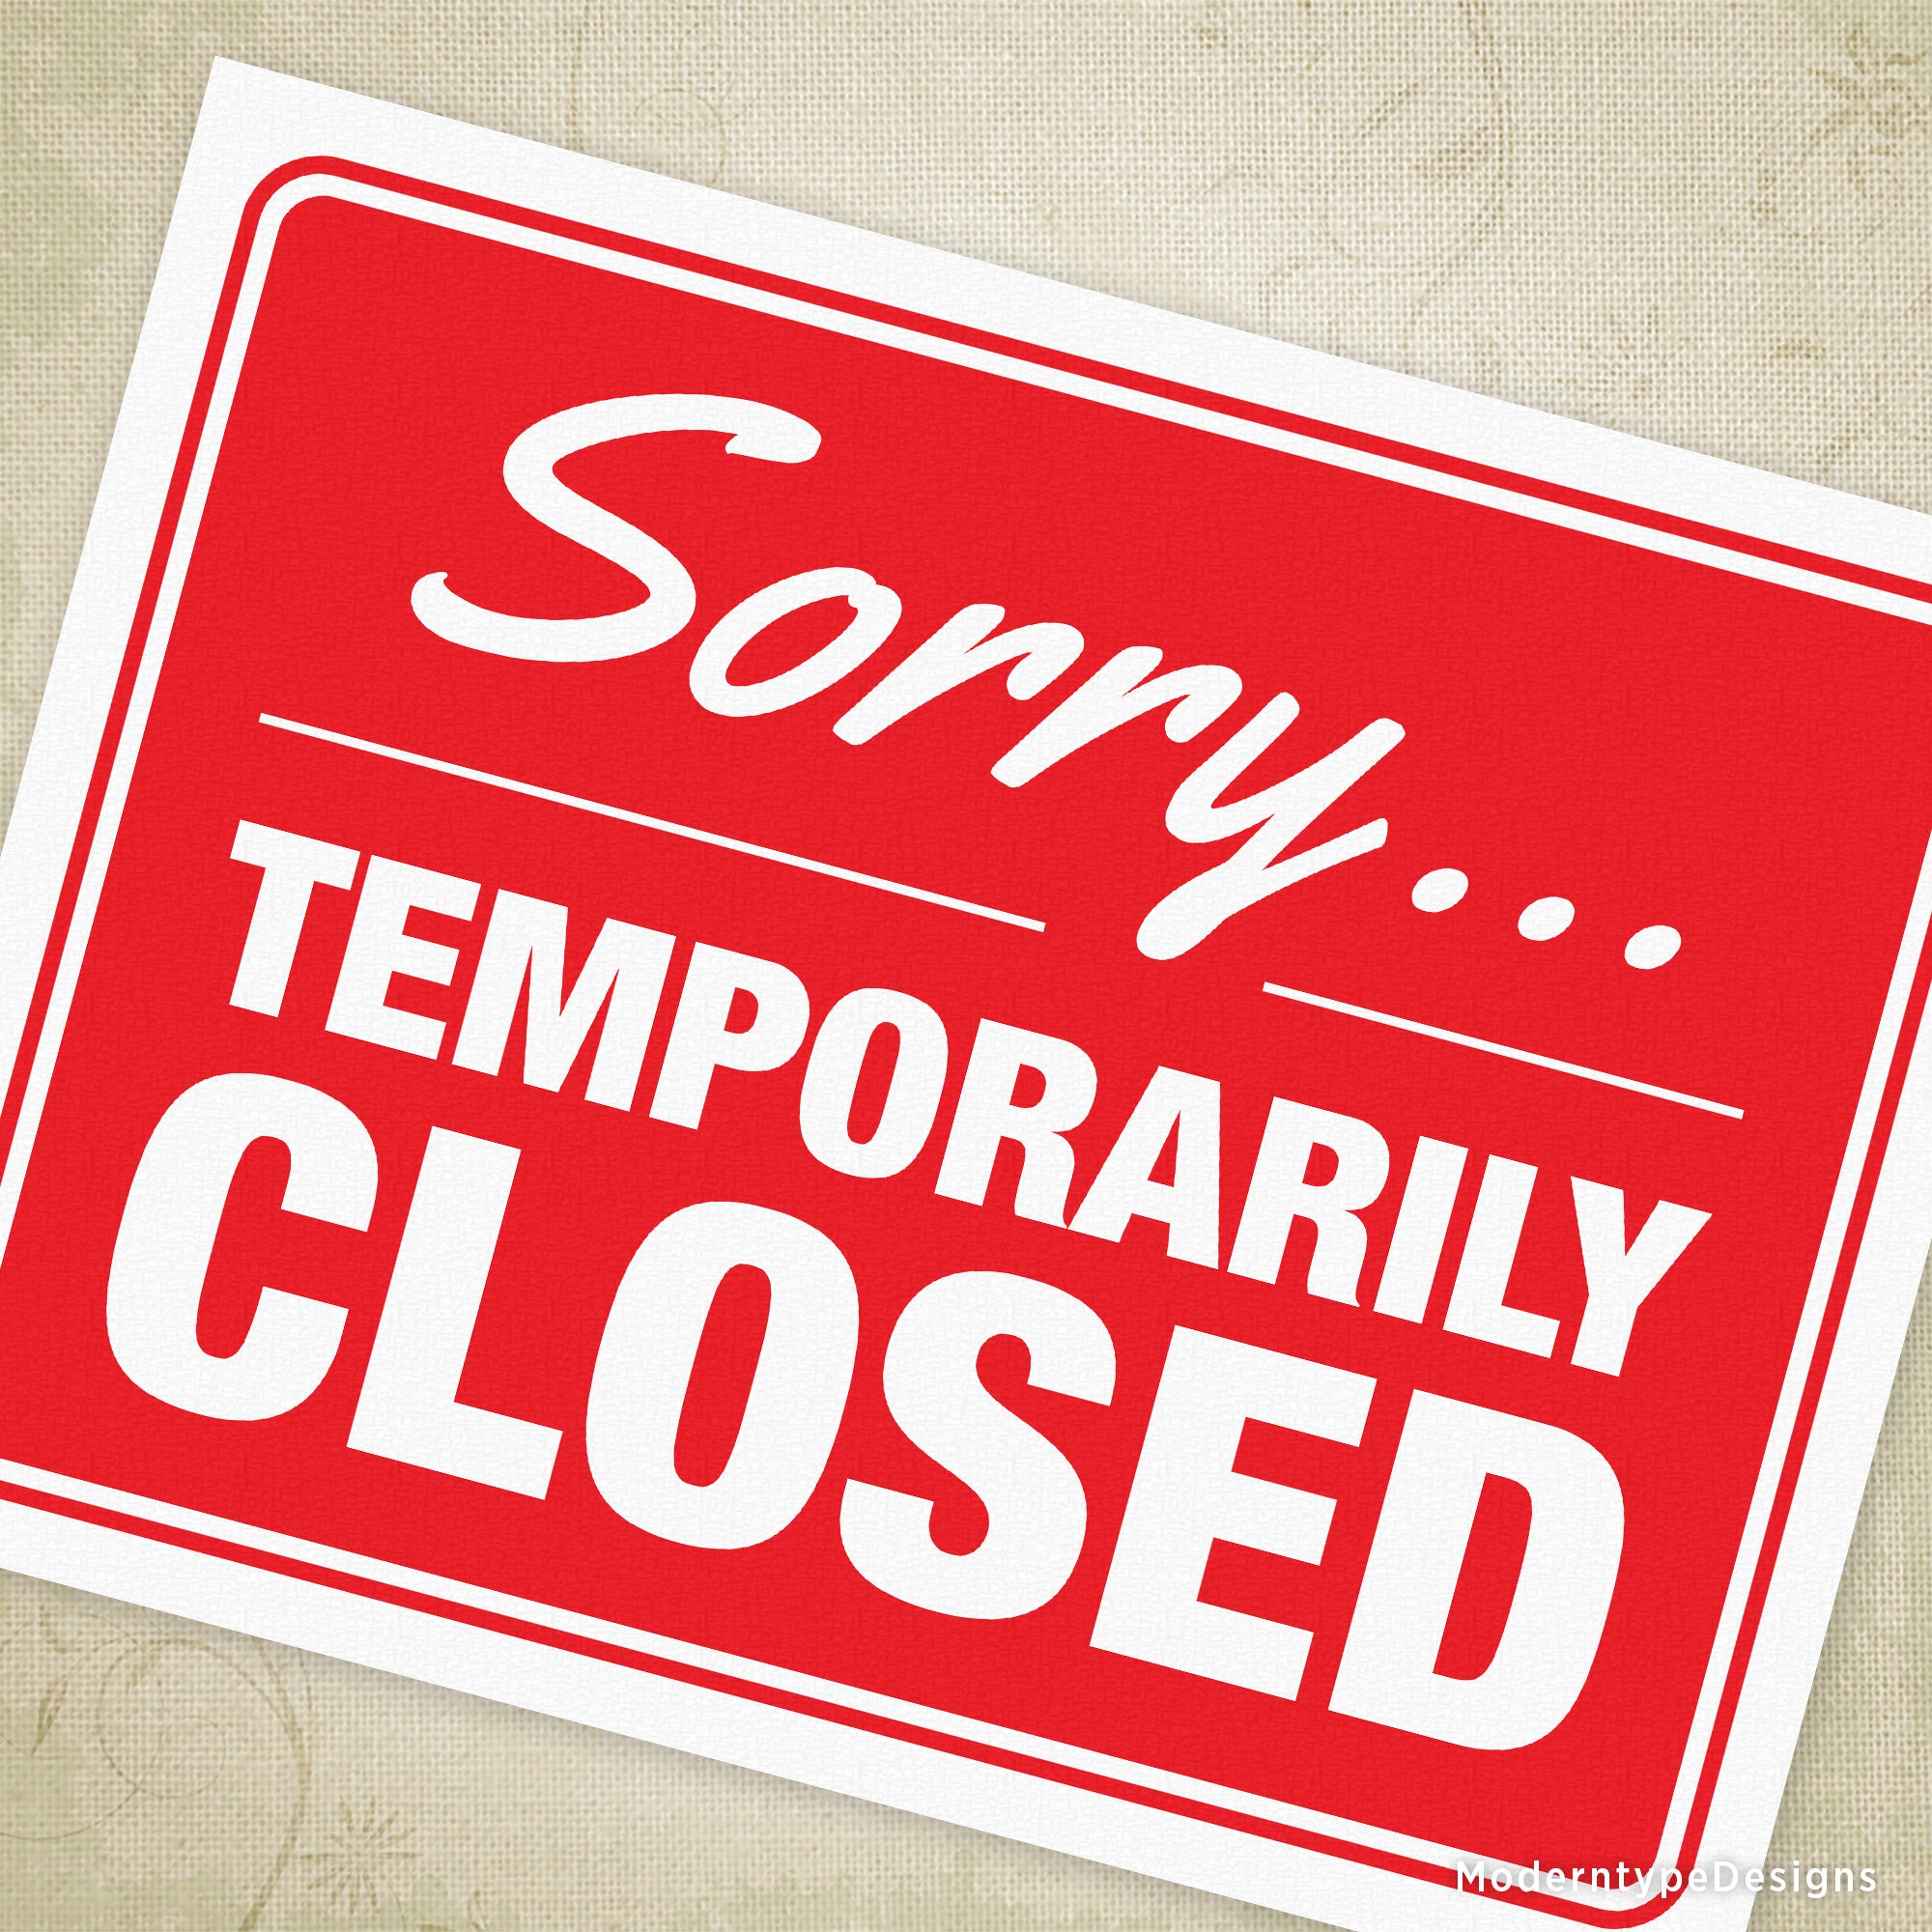 Printable Closed Sign, Sorry We're Closed, Instant Download Sorry